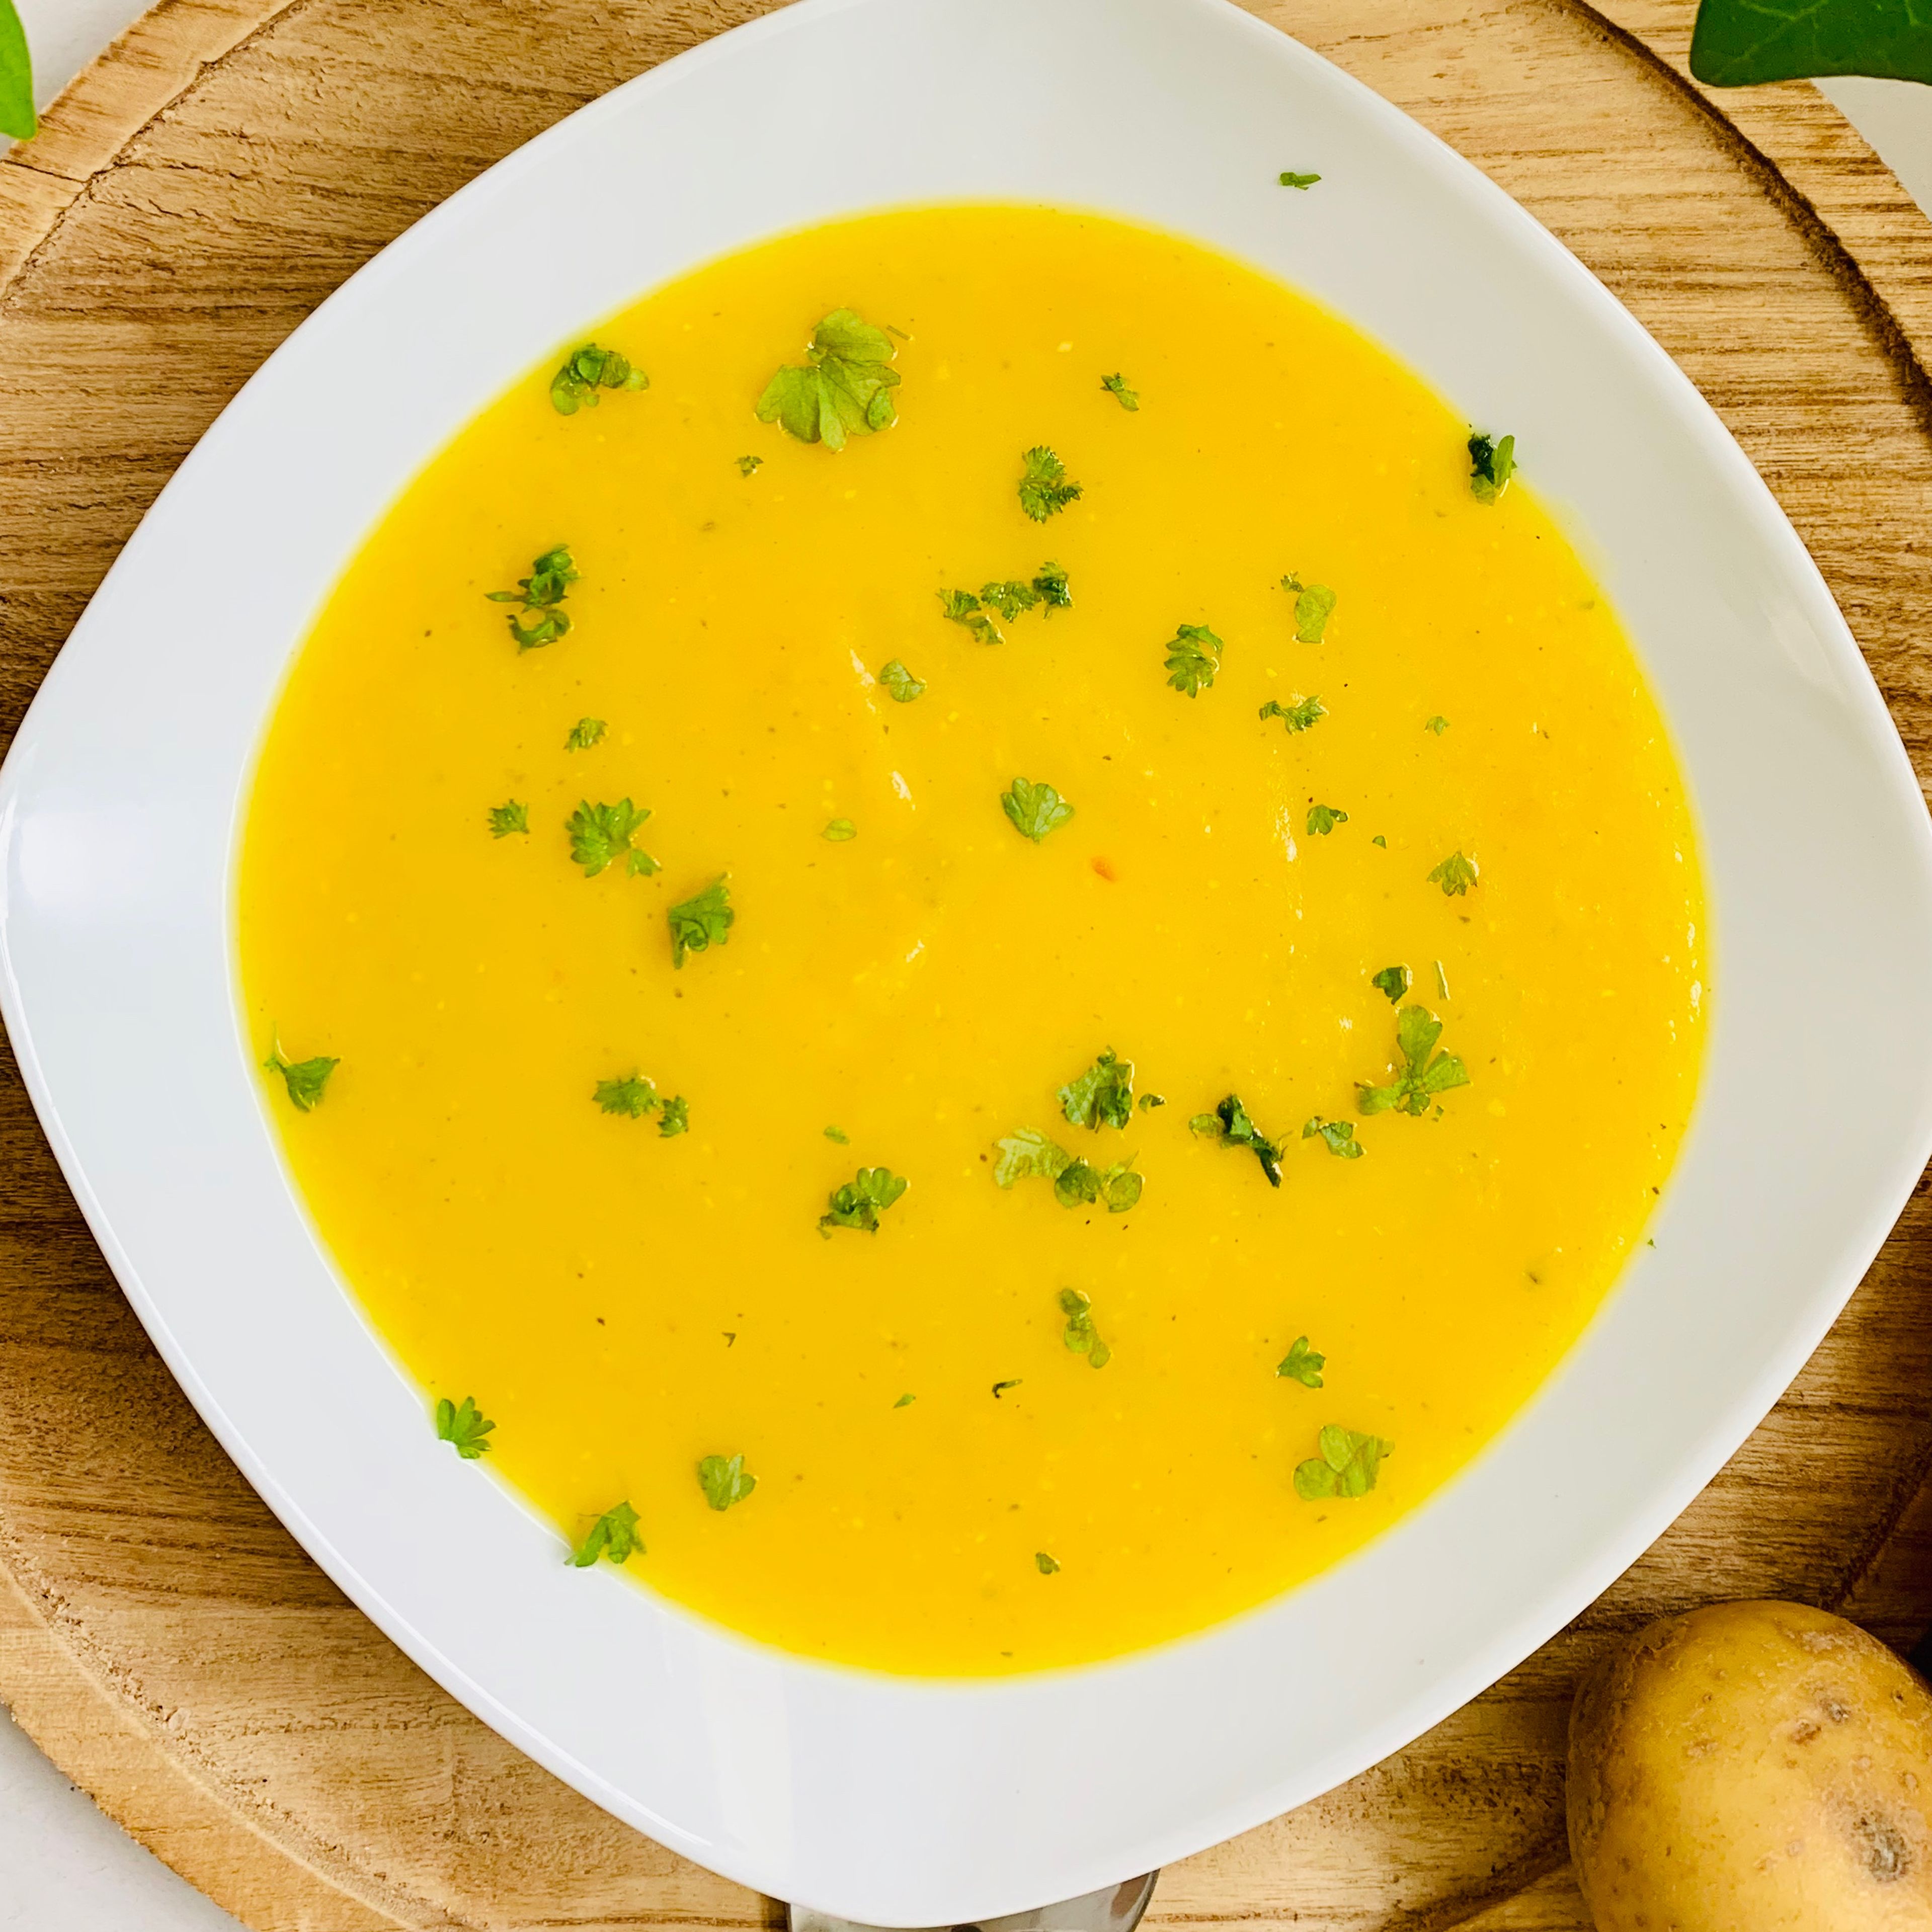 Blend the soup and season well. 1tsp of tumeric should be enough. If you like you can garnish the soup with some parsley. You can serve some nice bread or chicken skewers to this soup. 